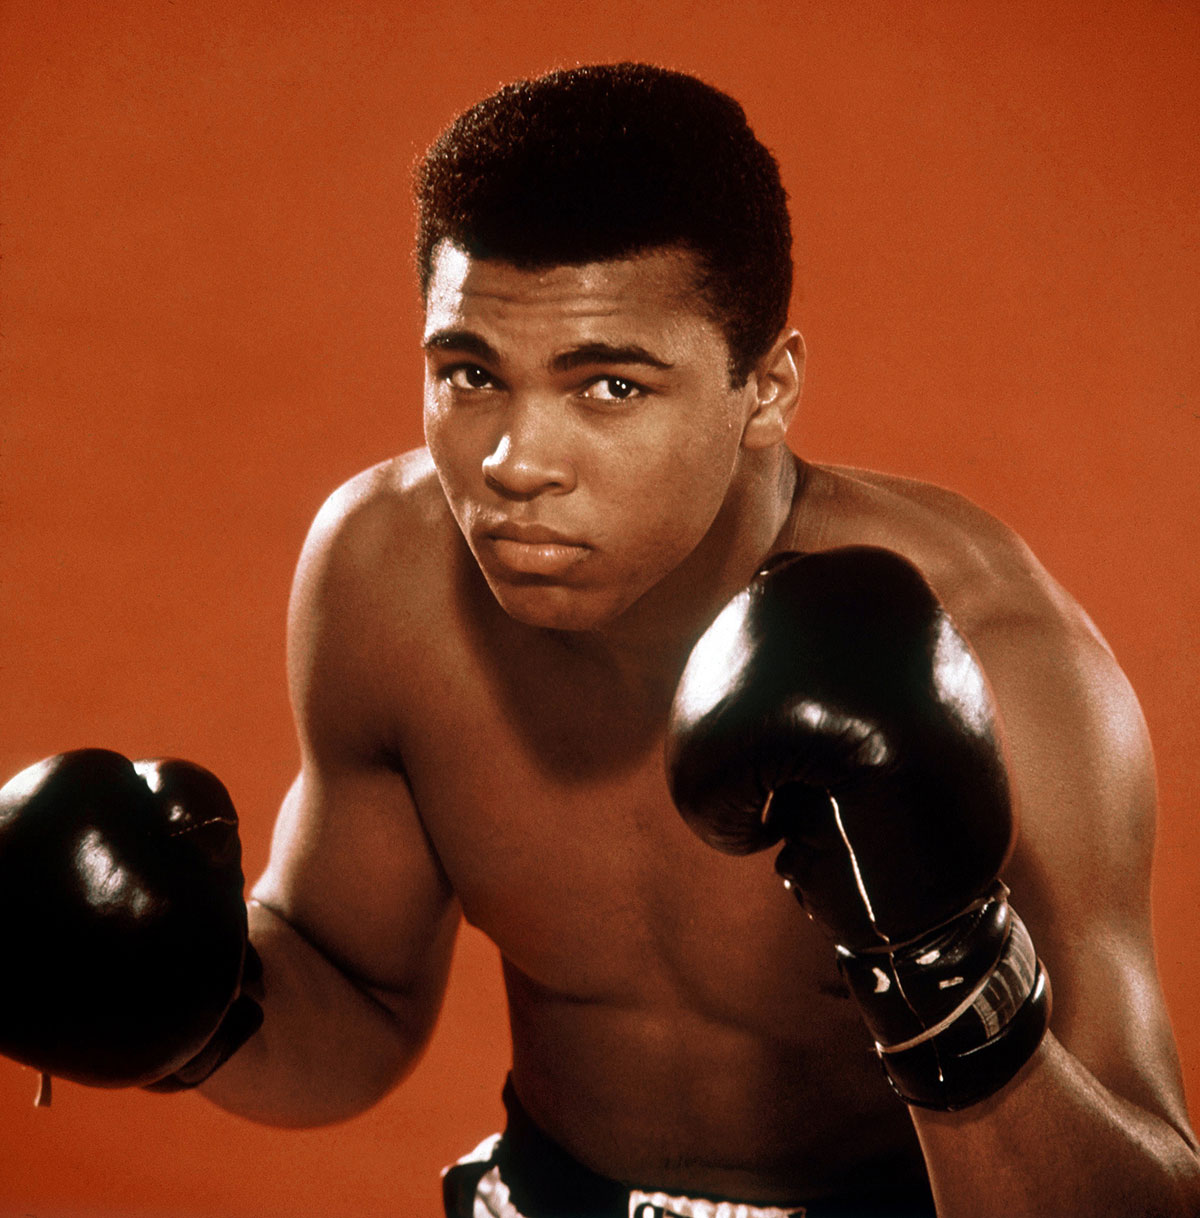 The Greatest, Muhammad Ali, dies at 74 pic